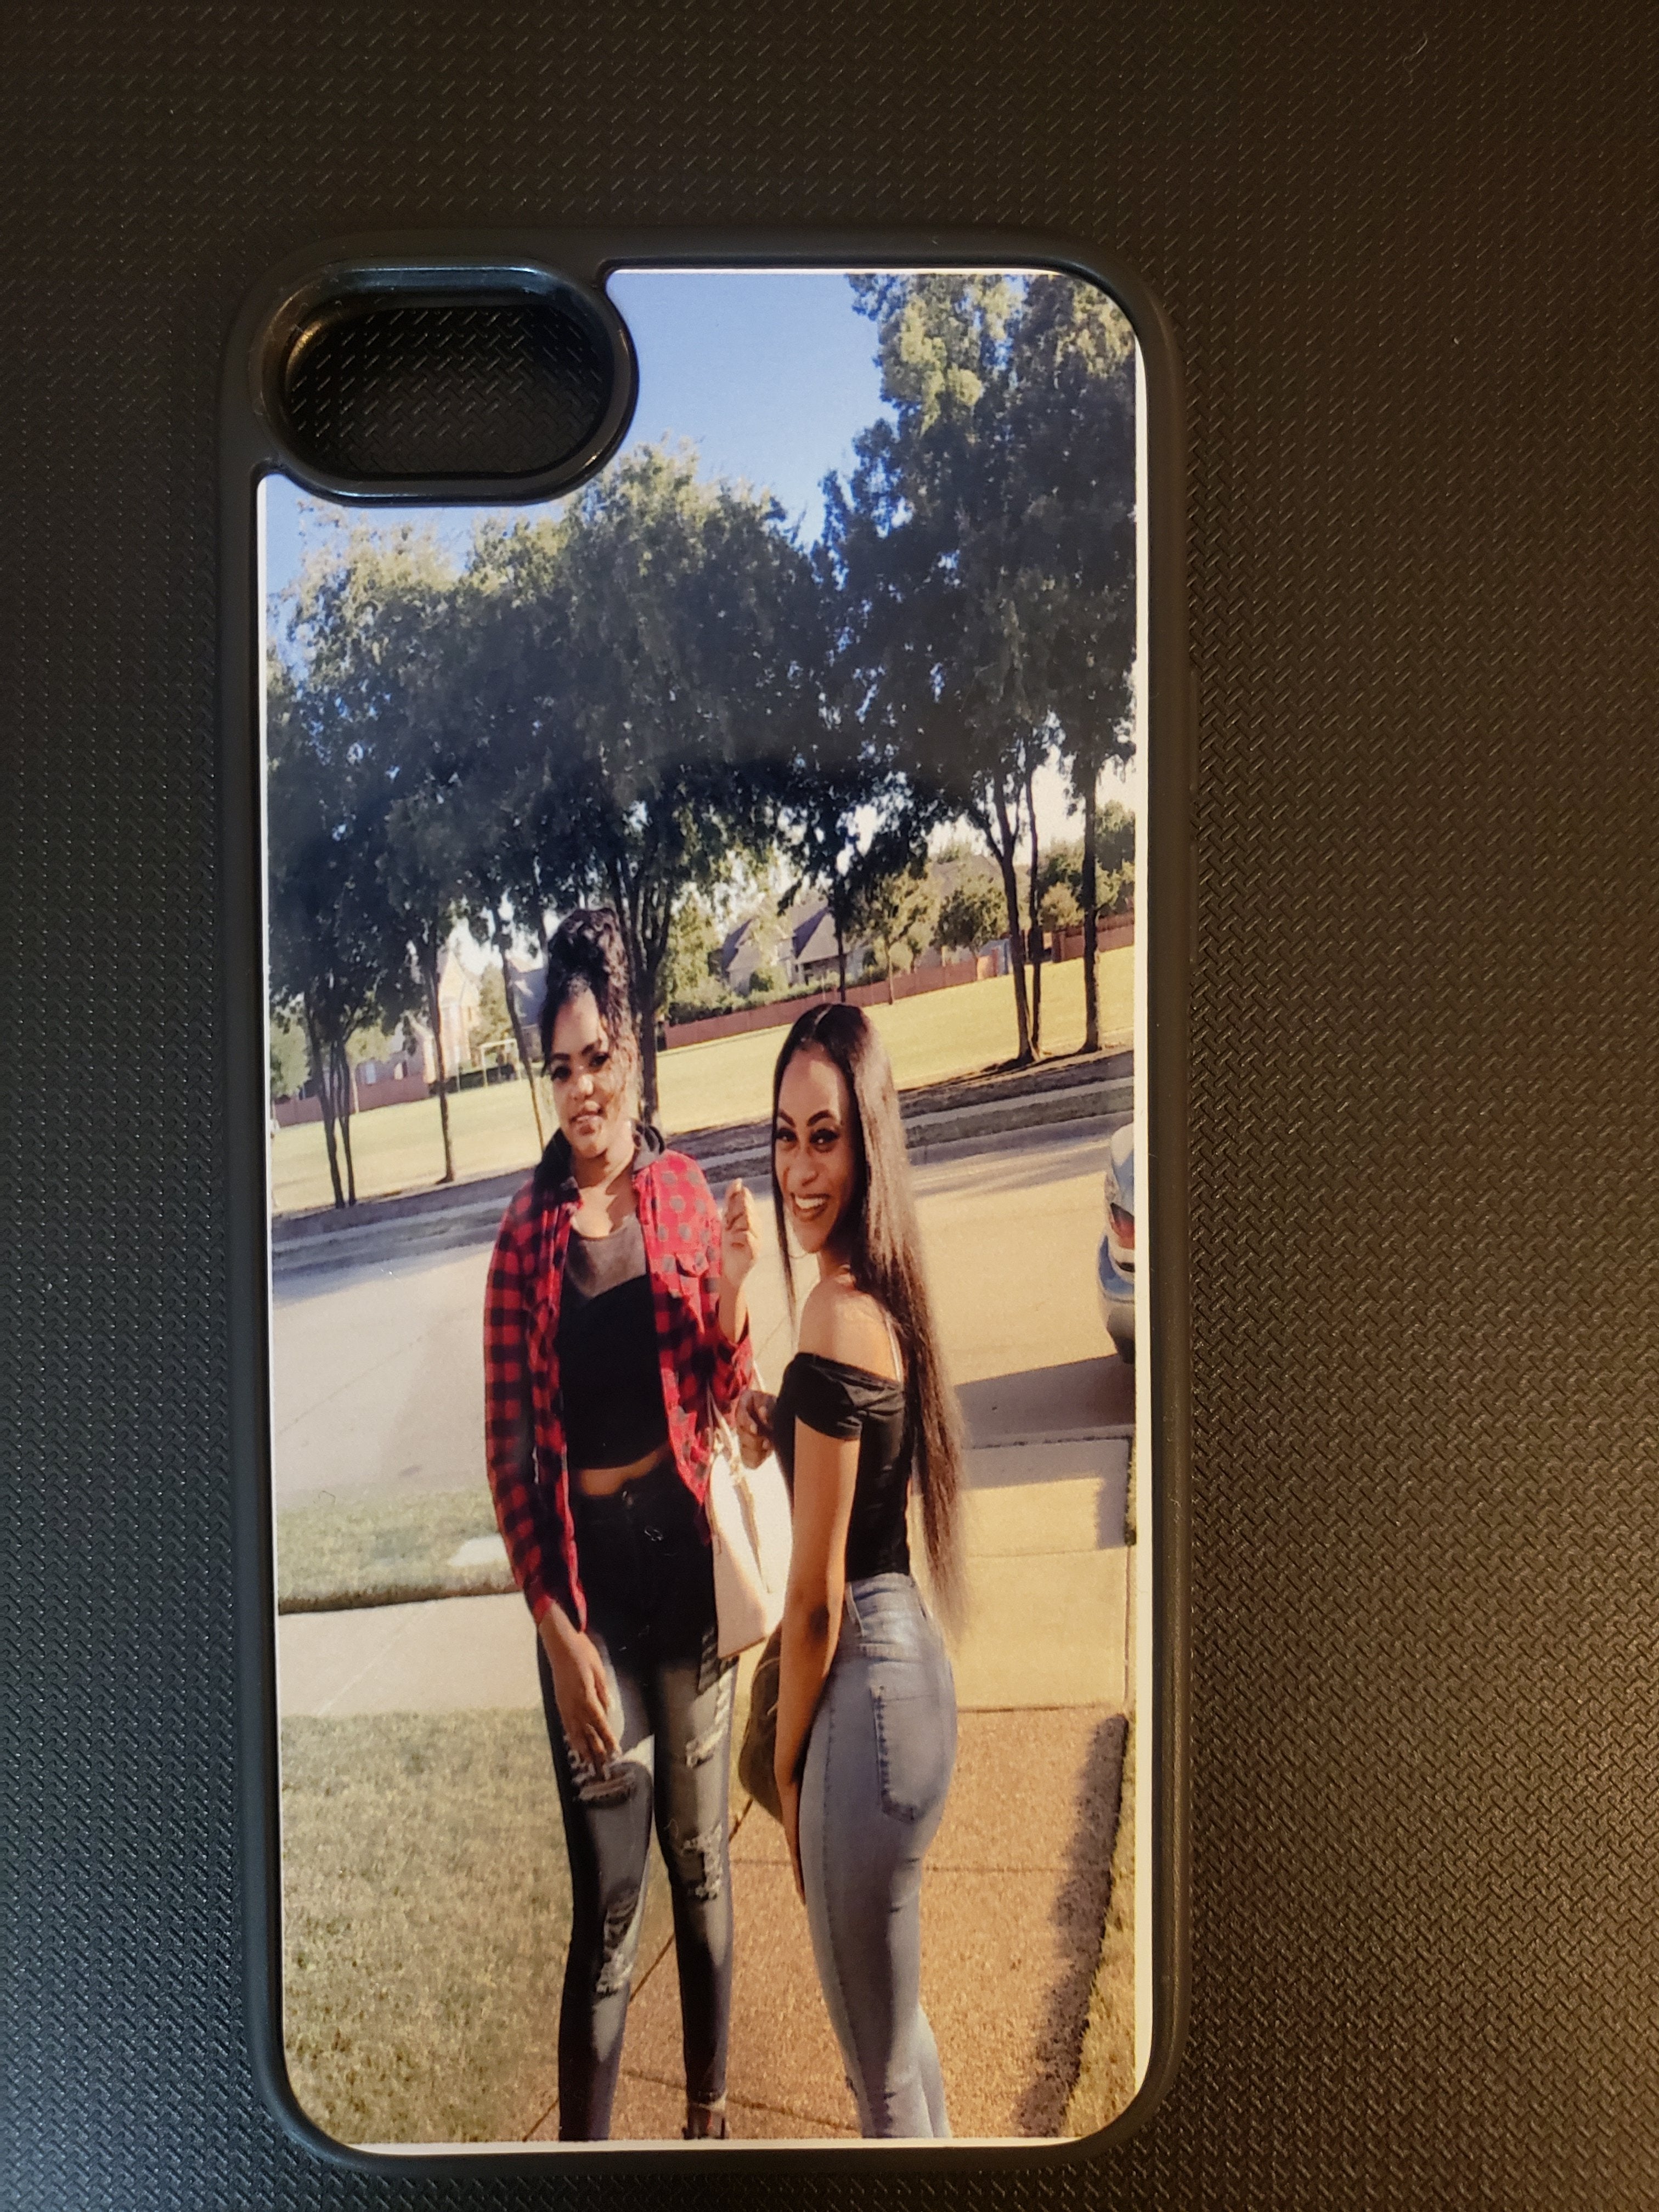 Personalize Phone Cases - JVN Creations & Designs